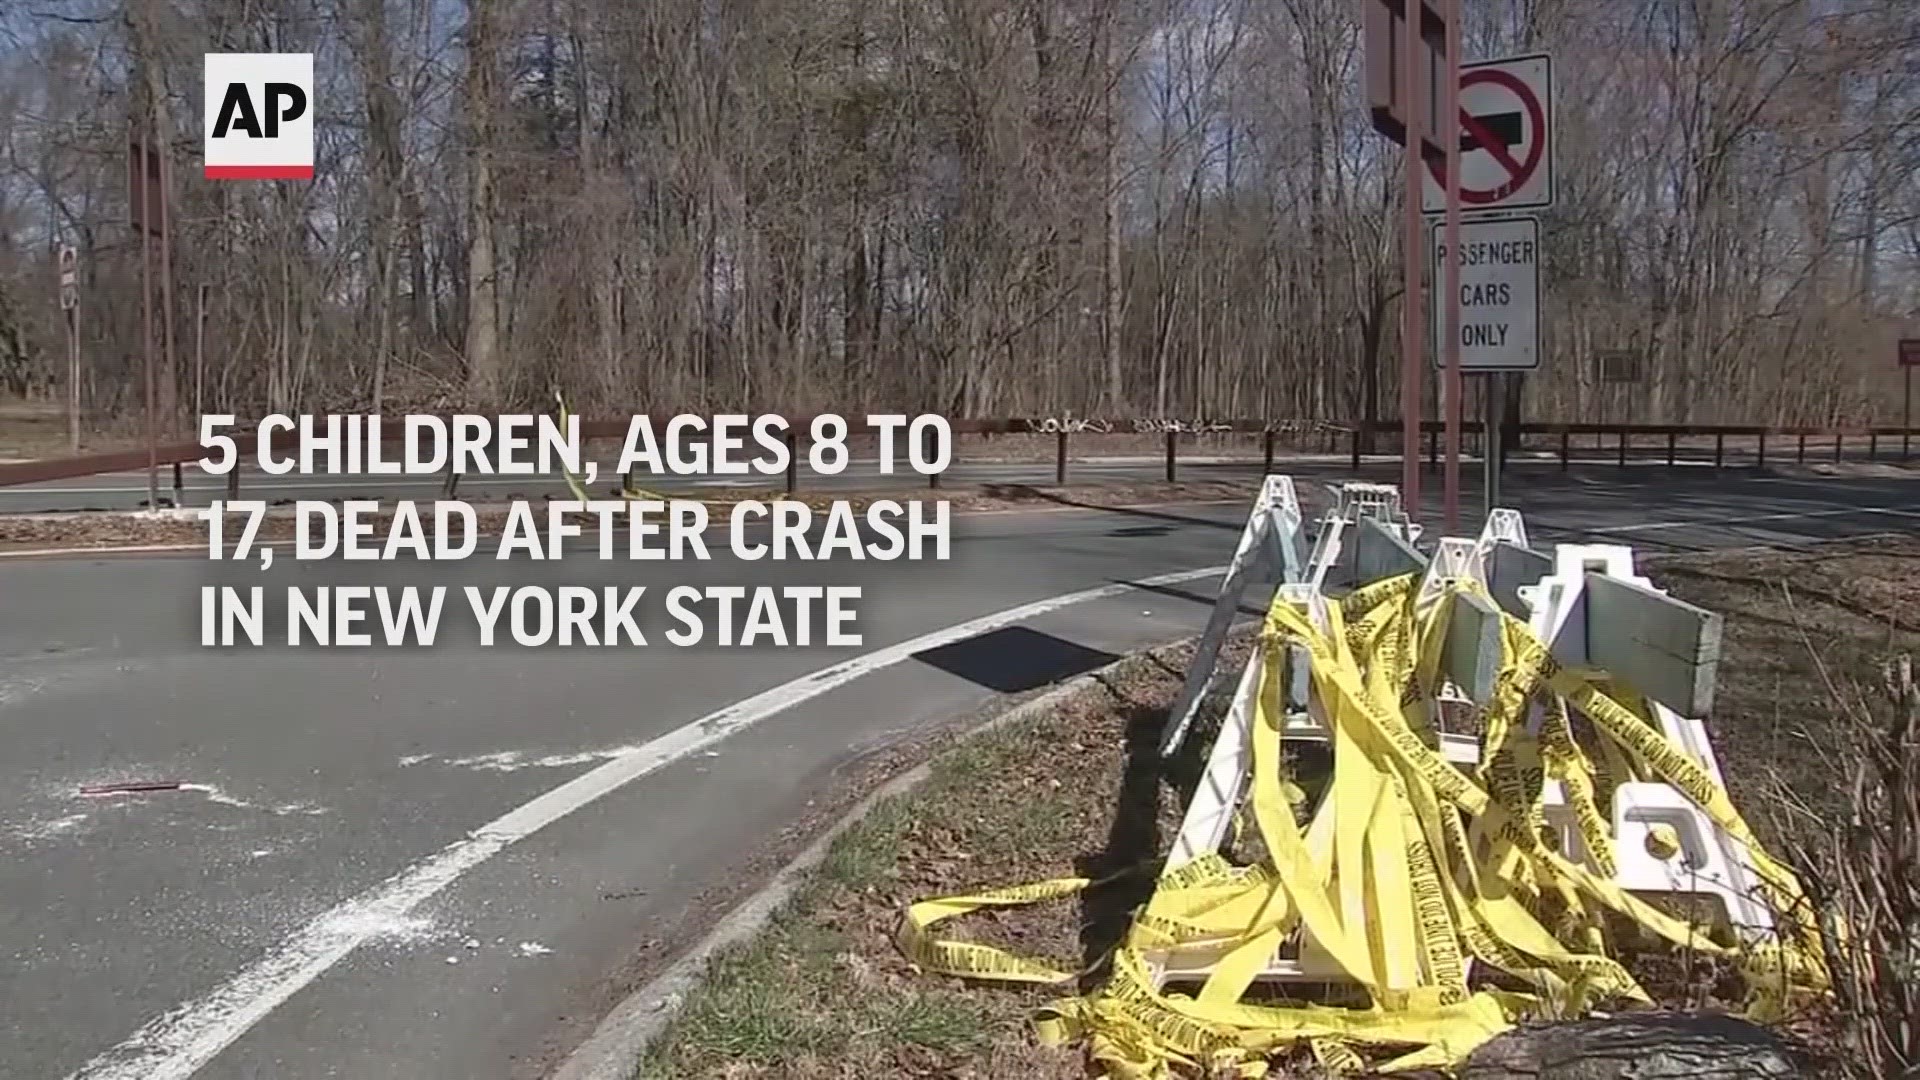 Five children from Connecticut, ranging in age from 8 to 17, were killed in a fiery early morning crash Sunday on a New York highway, police said. (March 20)